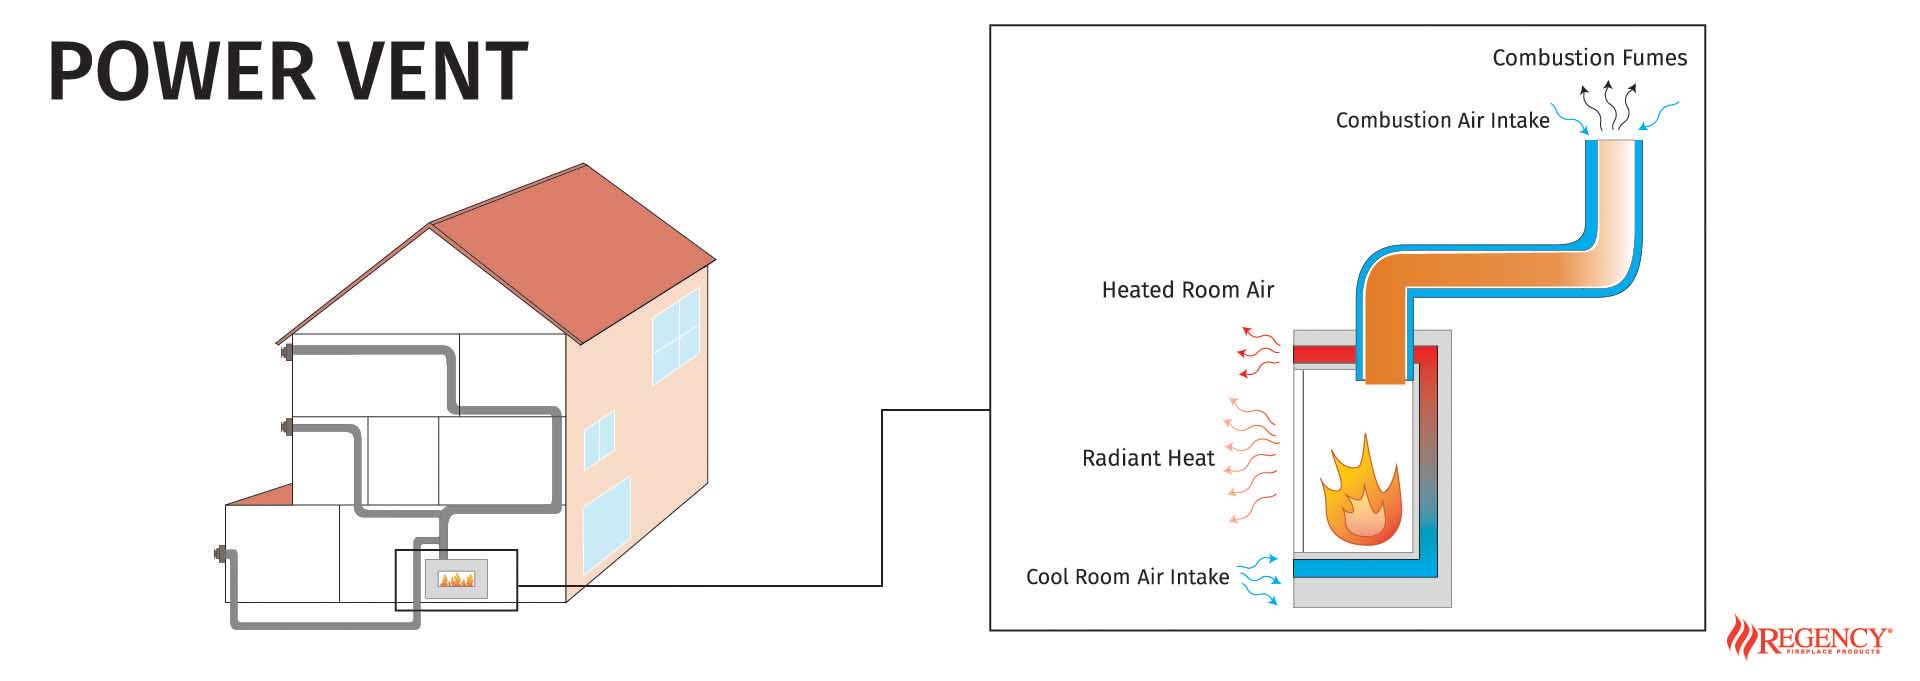 Diagram of how Power vent fireplaces work